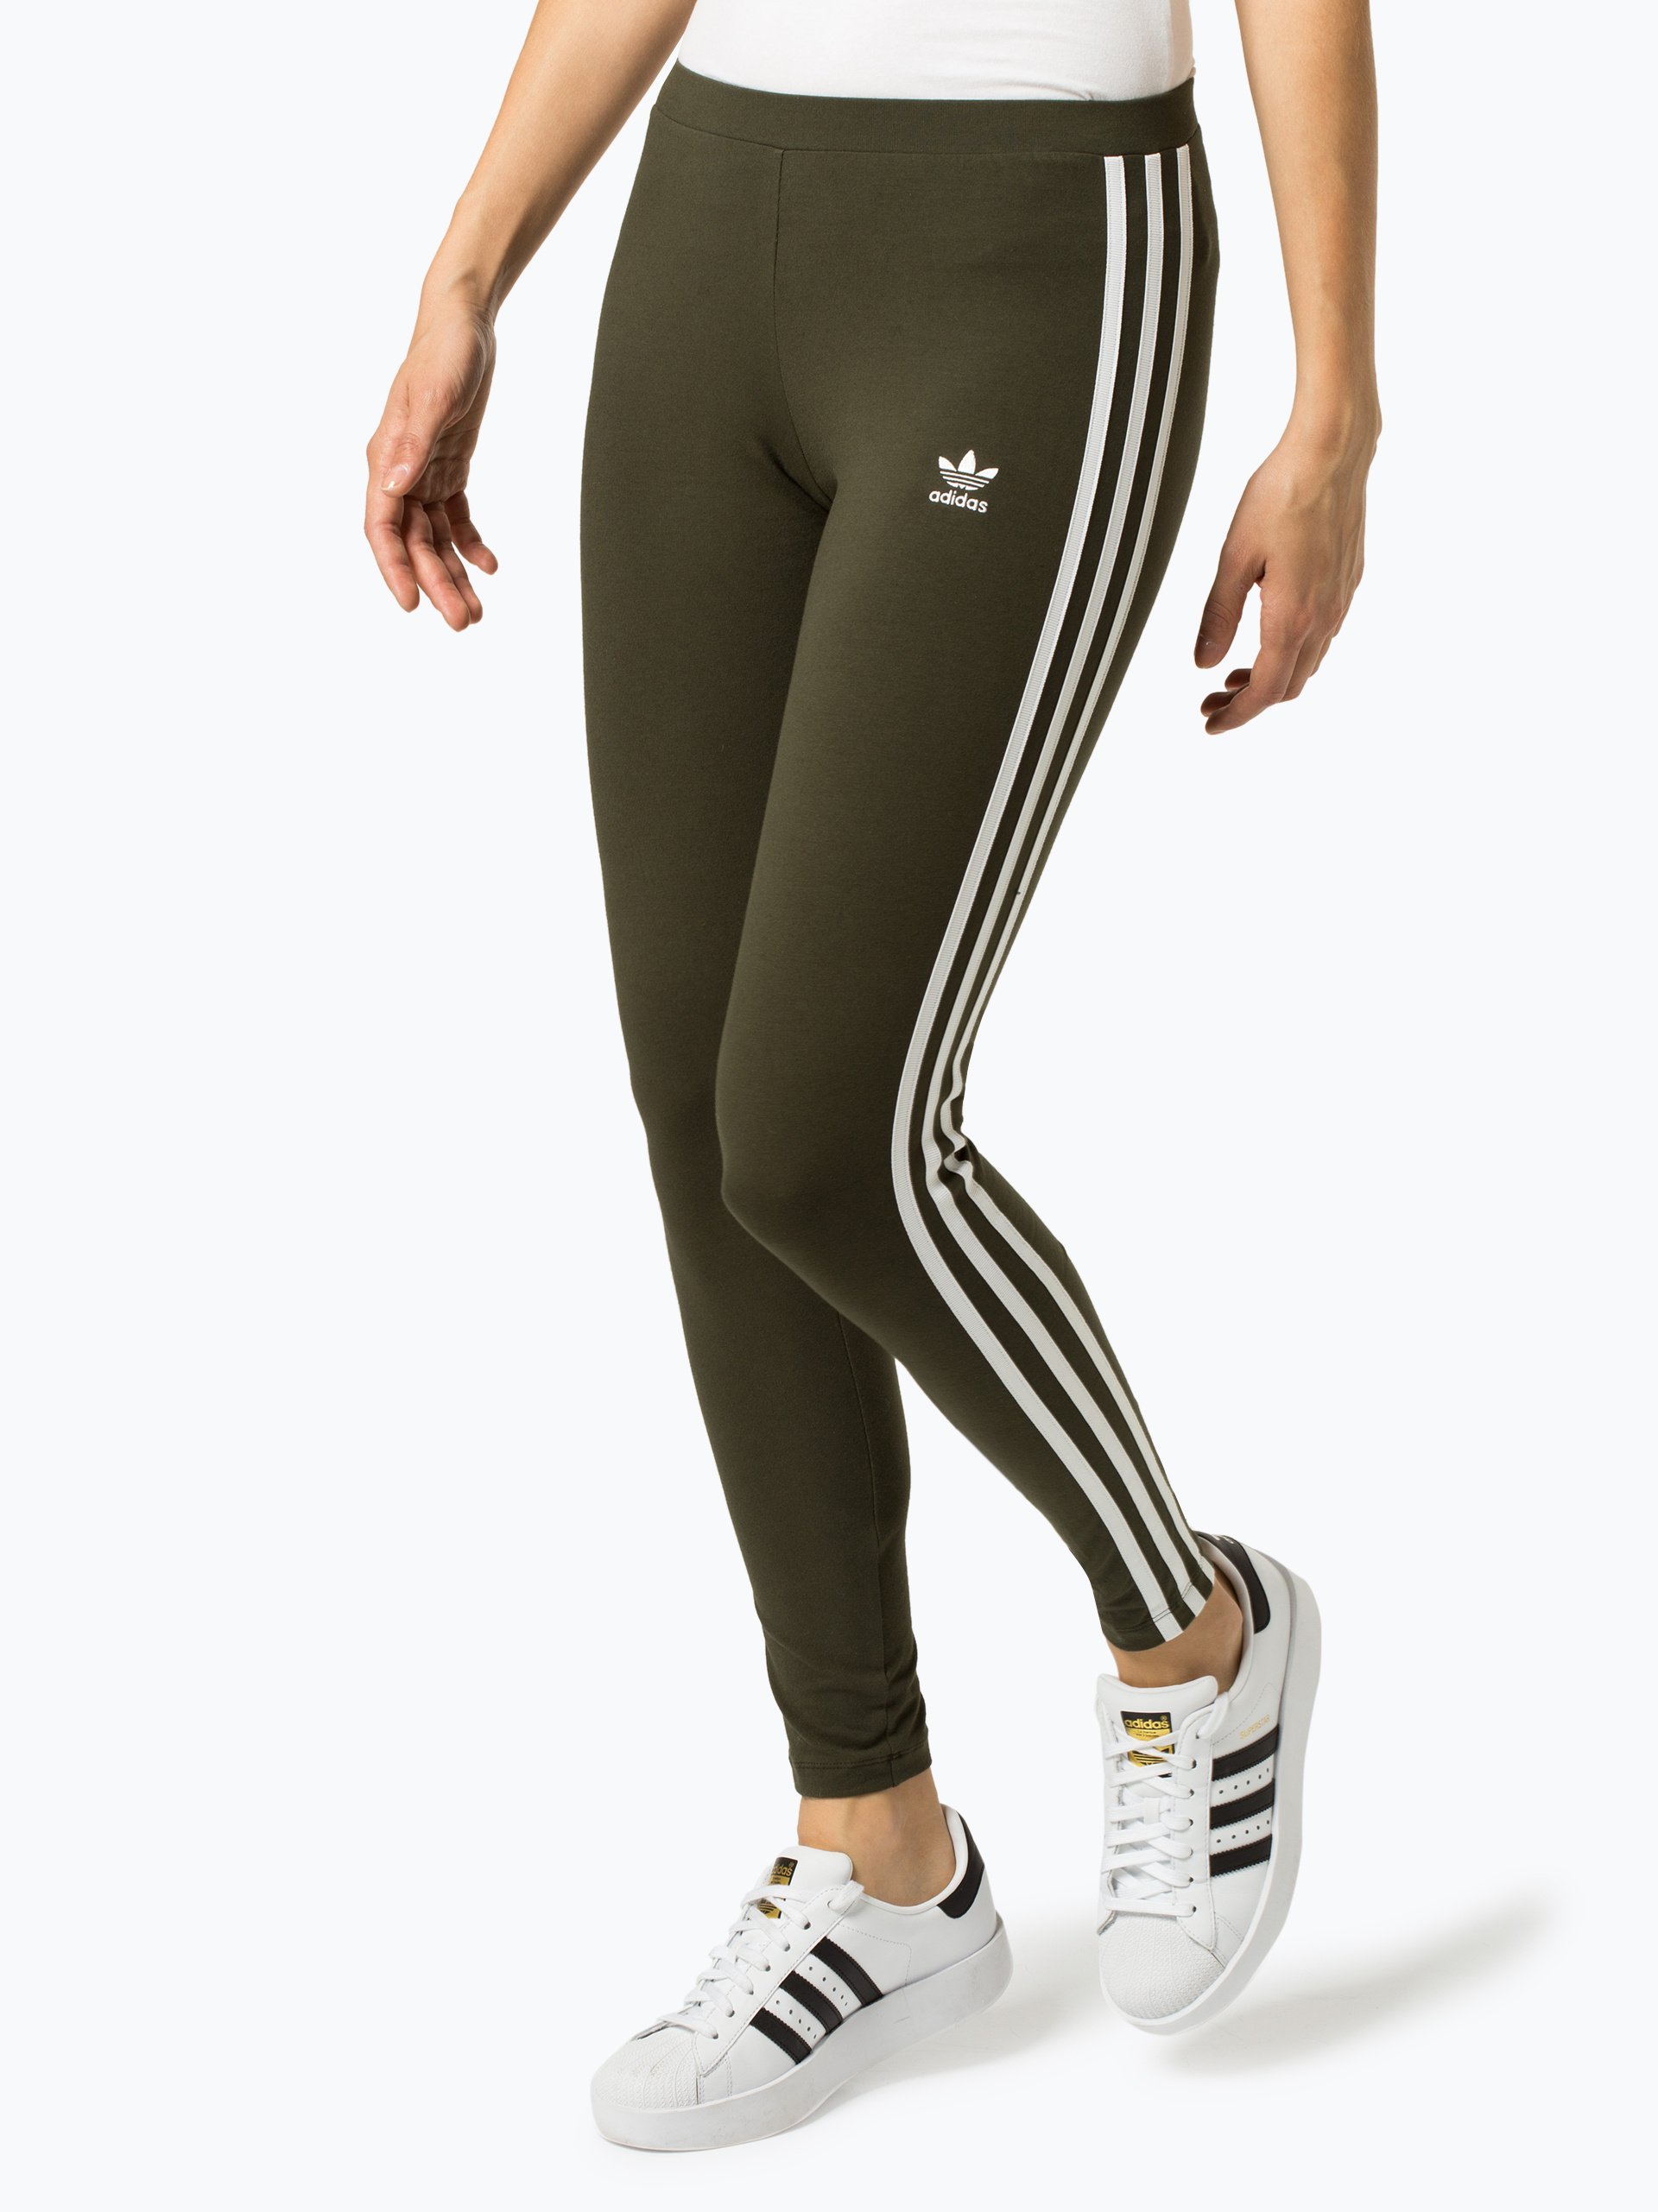 3 Stripes Mesh Leggings Adidas Blue And Red  International Society of  Precision Agriculture